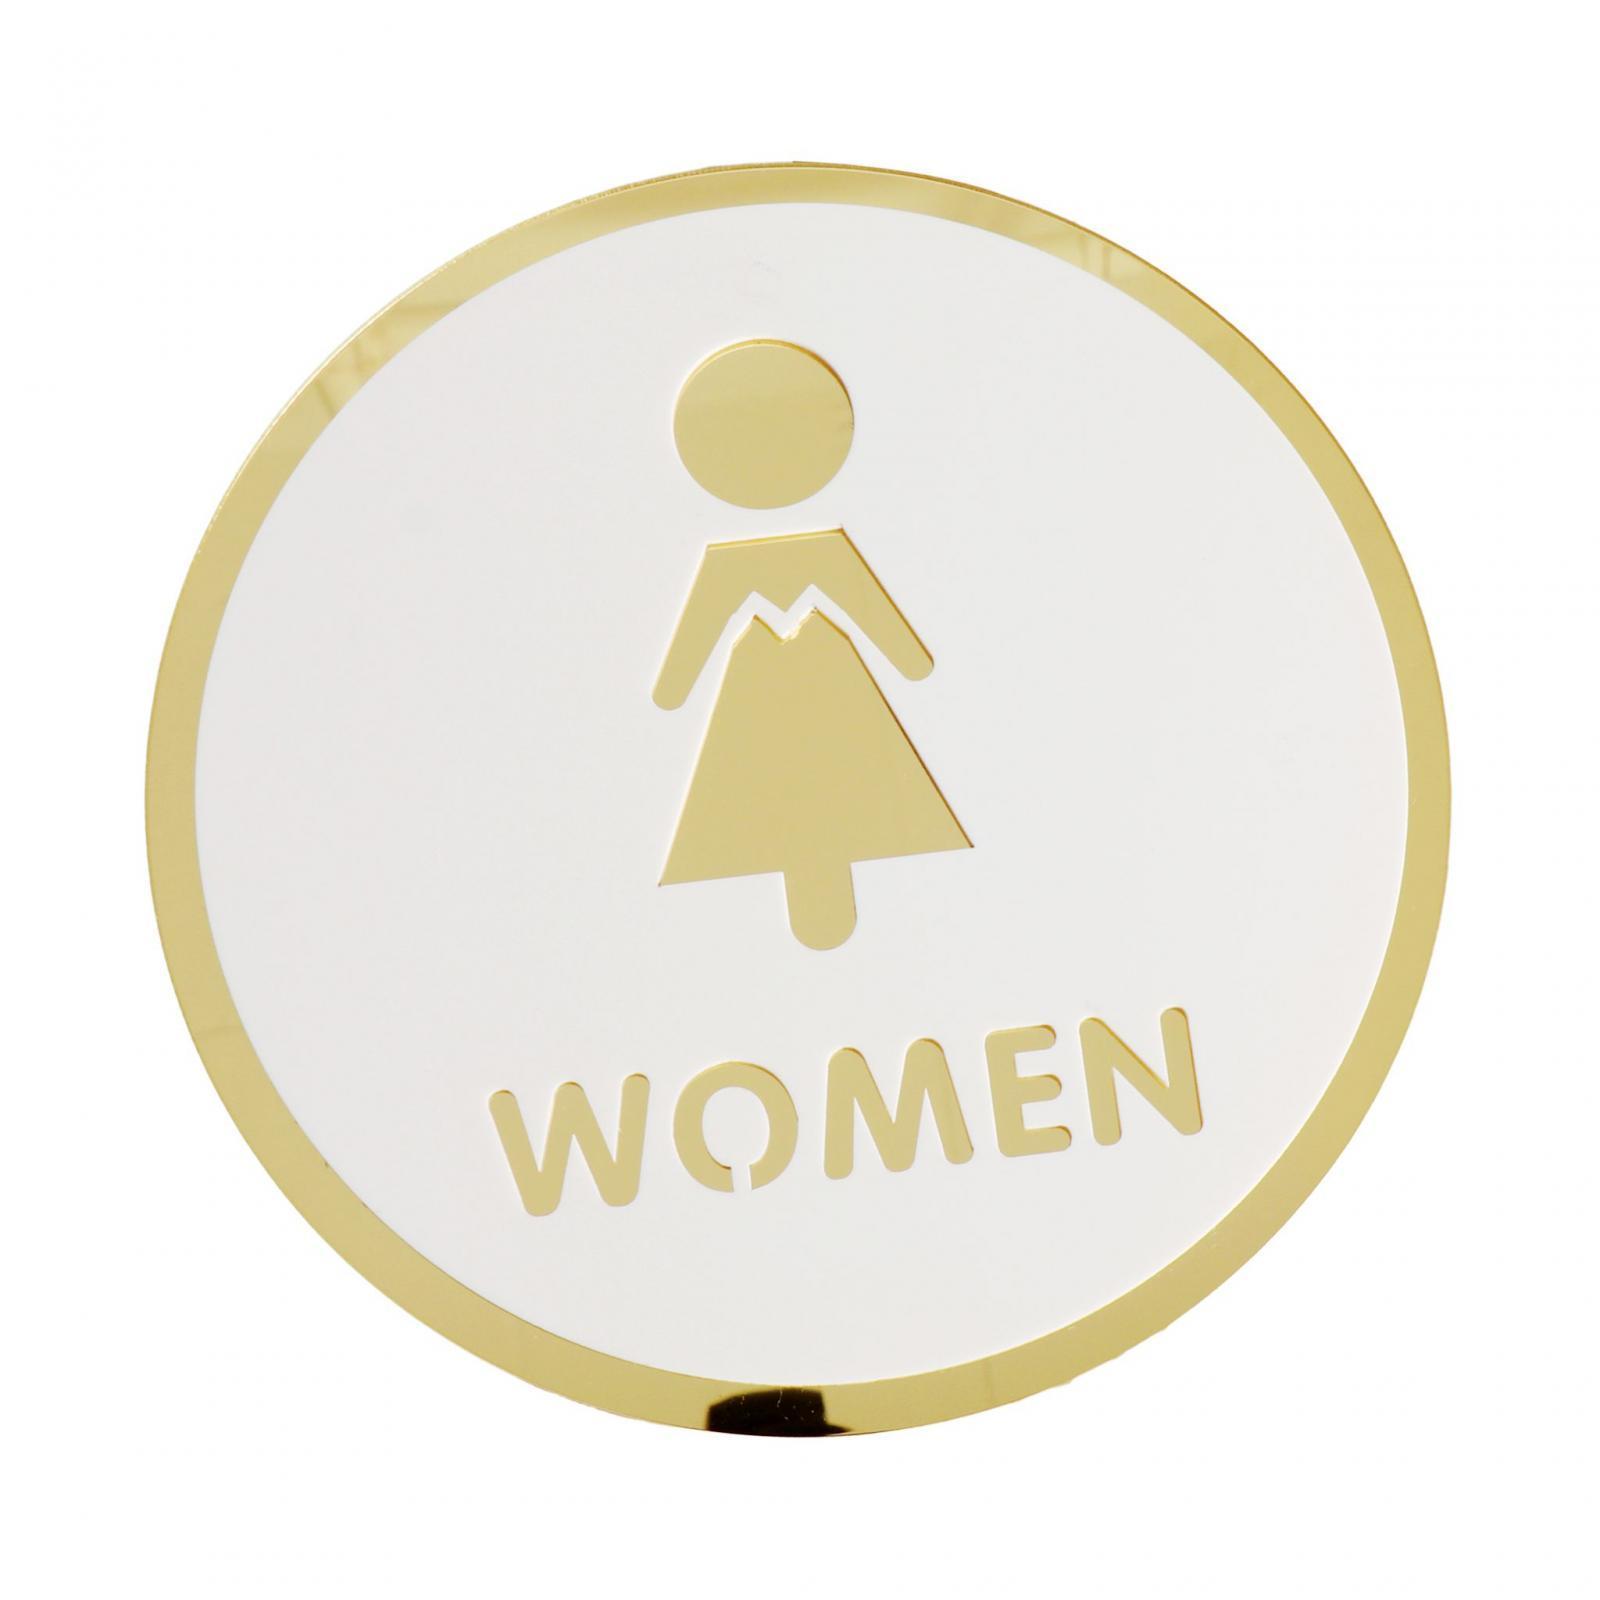 Toilet Sign Bathroom Signage Acrylic Bathroom Sign for Store Office Business